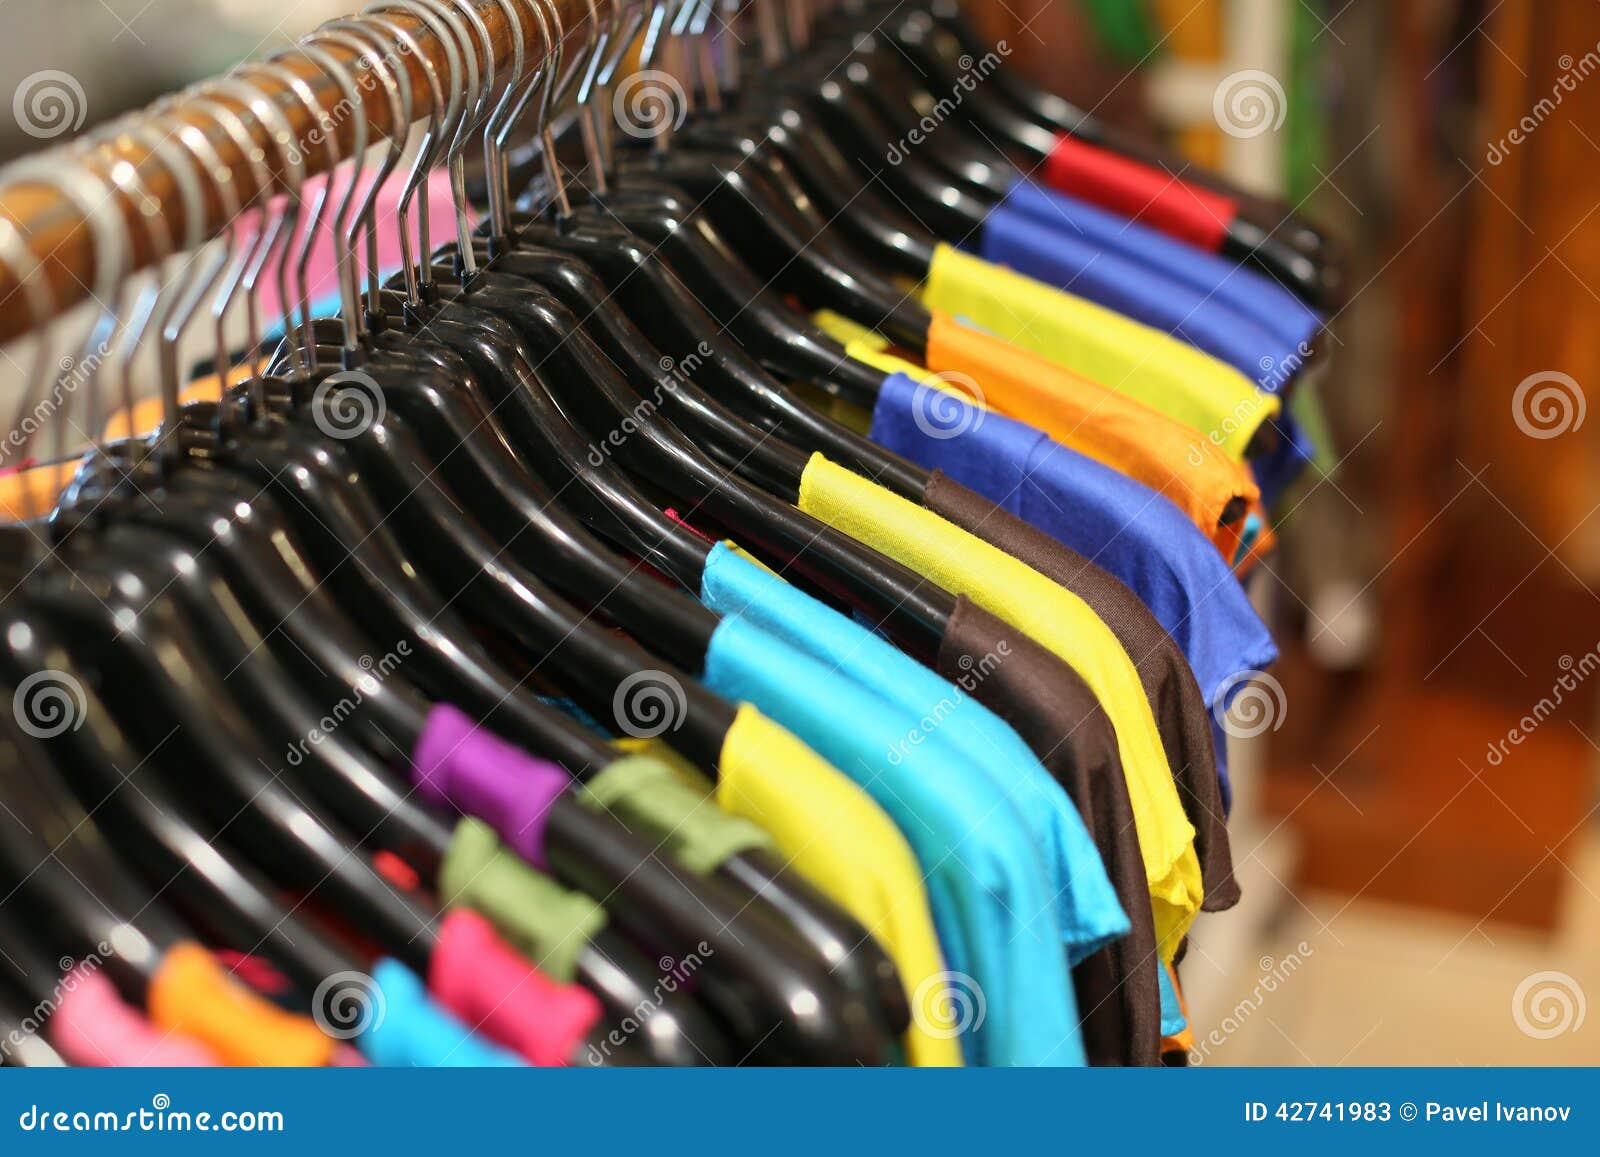 A Rack of Colorful Shirts Hanged for Sale at a Fair Stock Image - Image ...